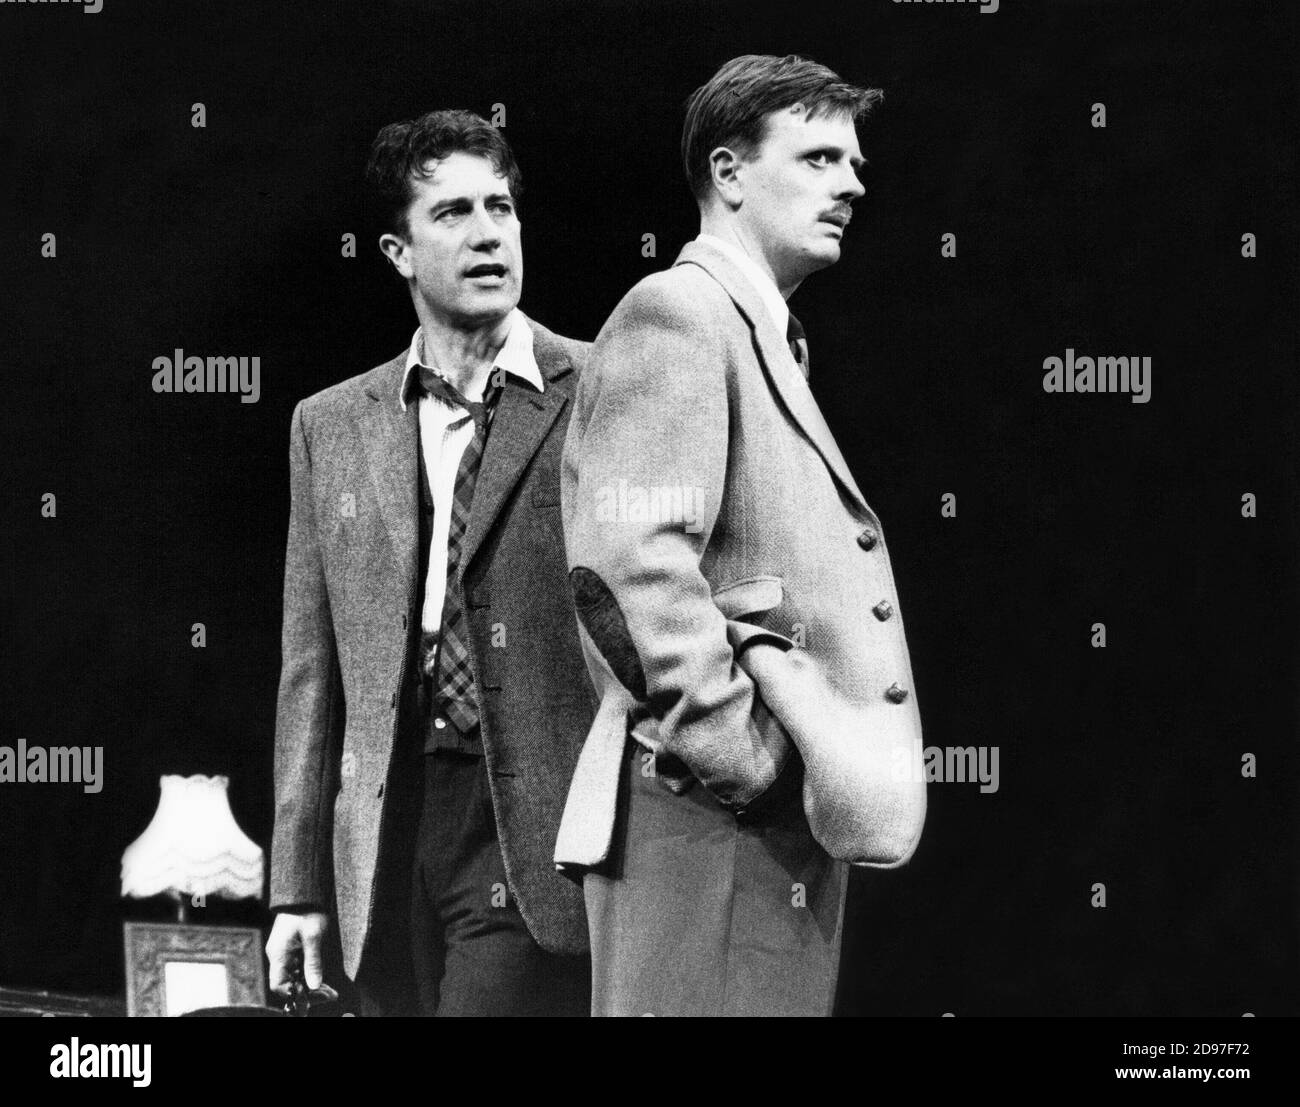 I HAVE BEEN HERE BEFORE  by J.B. Priestley  design: Norman Coates  lighting: Kevin Sleep  director: Matthew Francis  l-r: Brian Protheroe (Walter Ormund), Philip Franks (Oliver Farrant)  Palace Theatre, Watford, England  05/04/1990                 (c) Donald Cooper/Photostage   photos@photostage.co.uk   ref/BW-P-122-25 Stock Photo